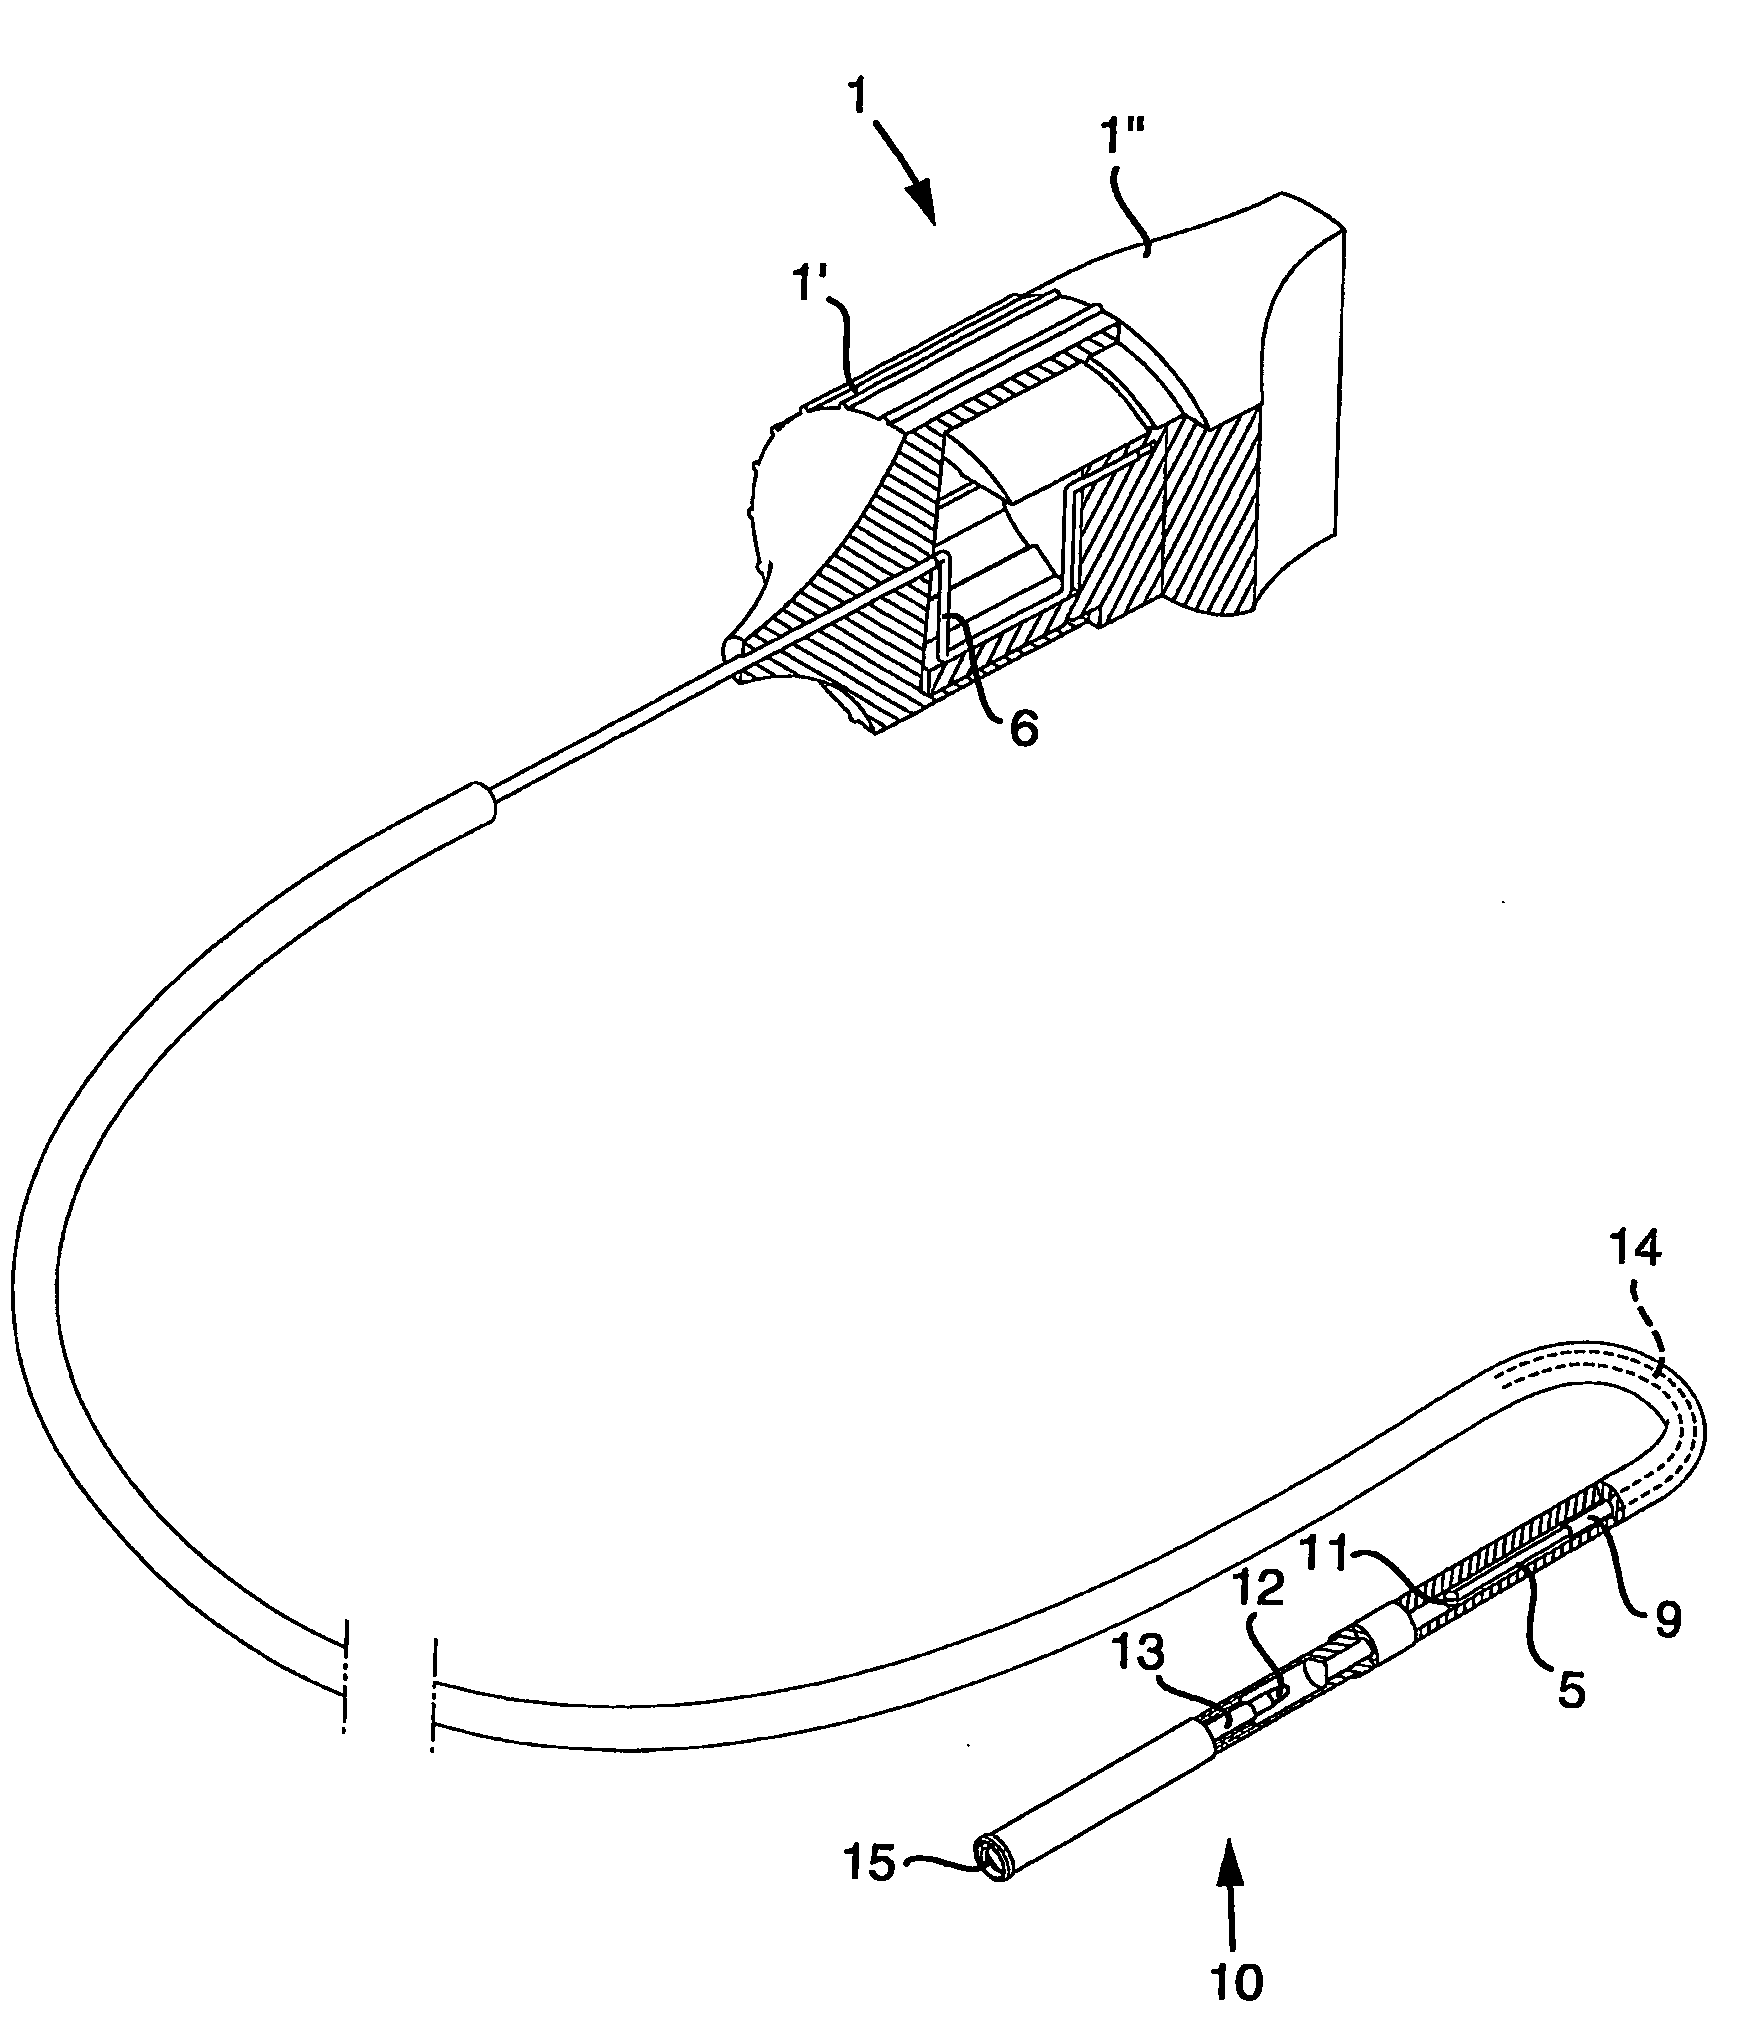 Tool and a Method for Attaching a Cardiac Stimulator Lead at a Desired Position Inside a Heart